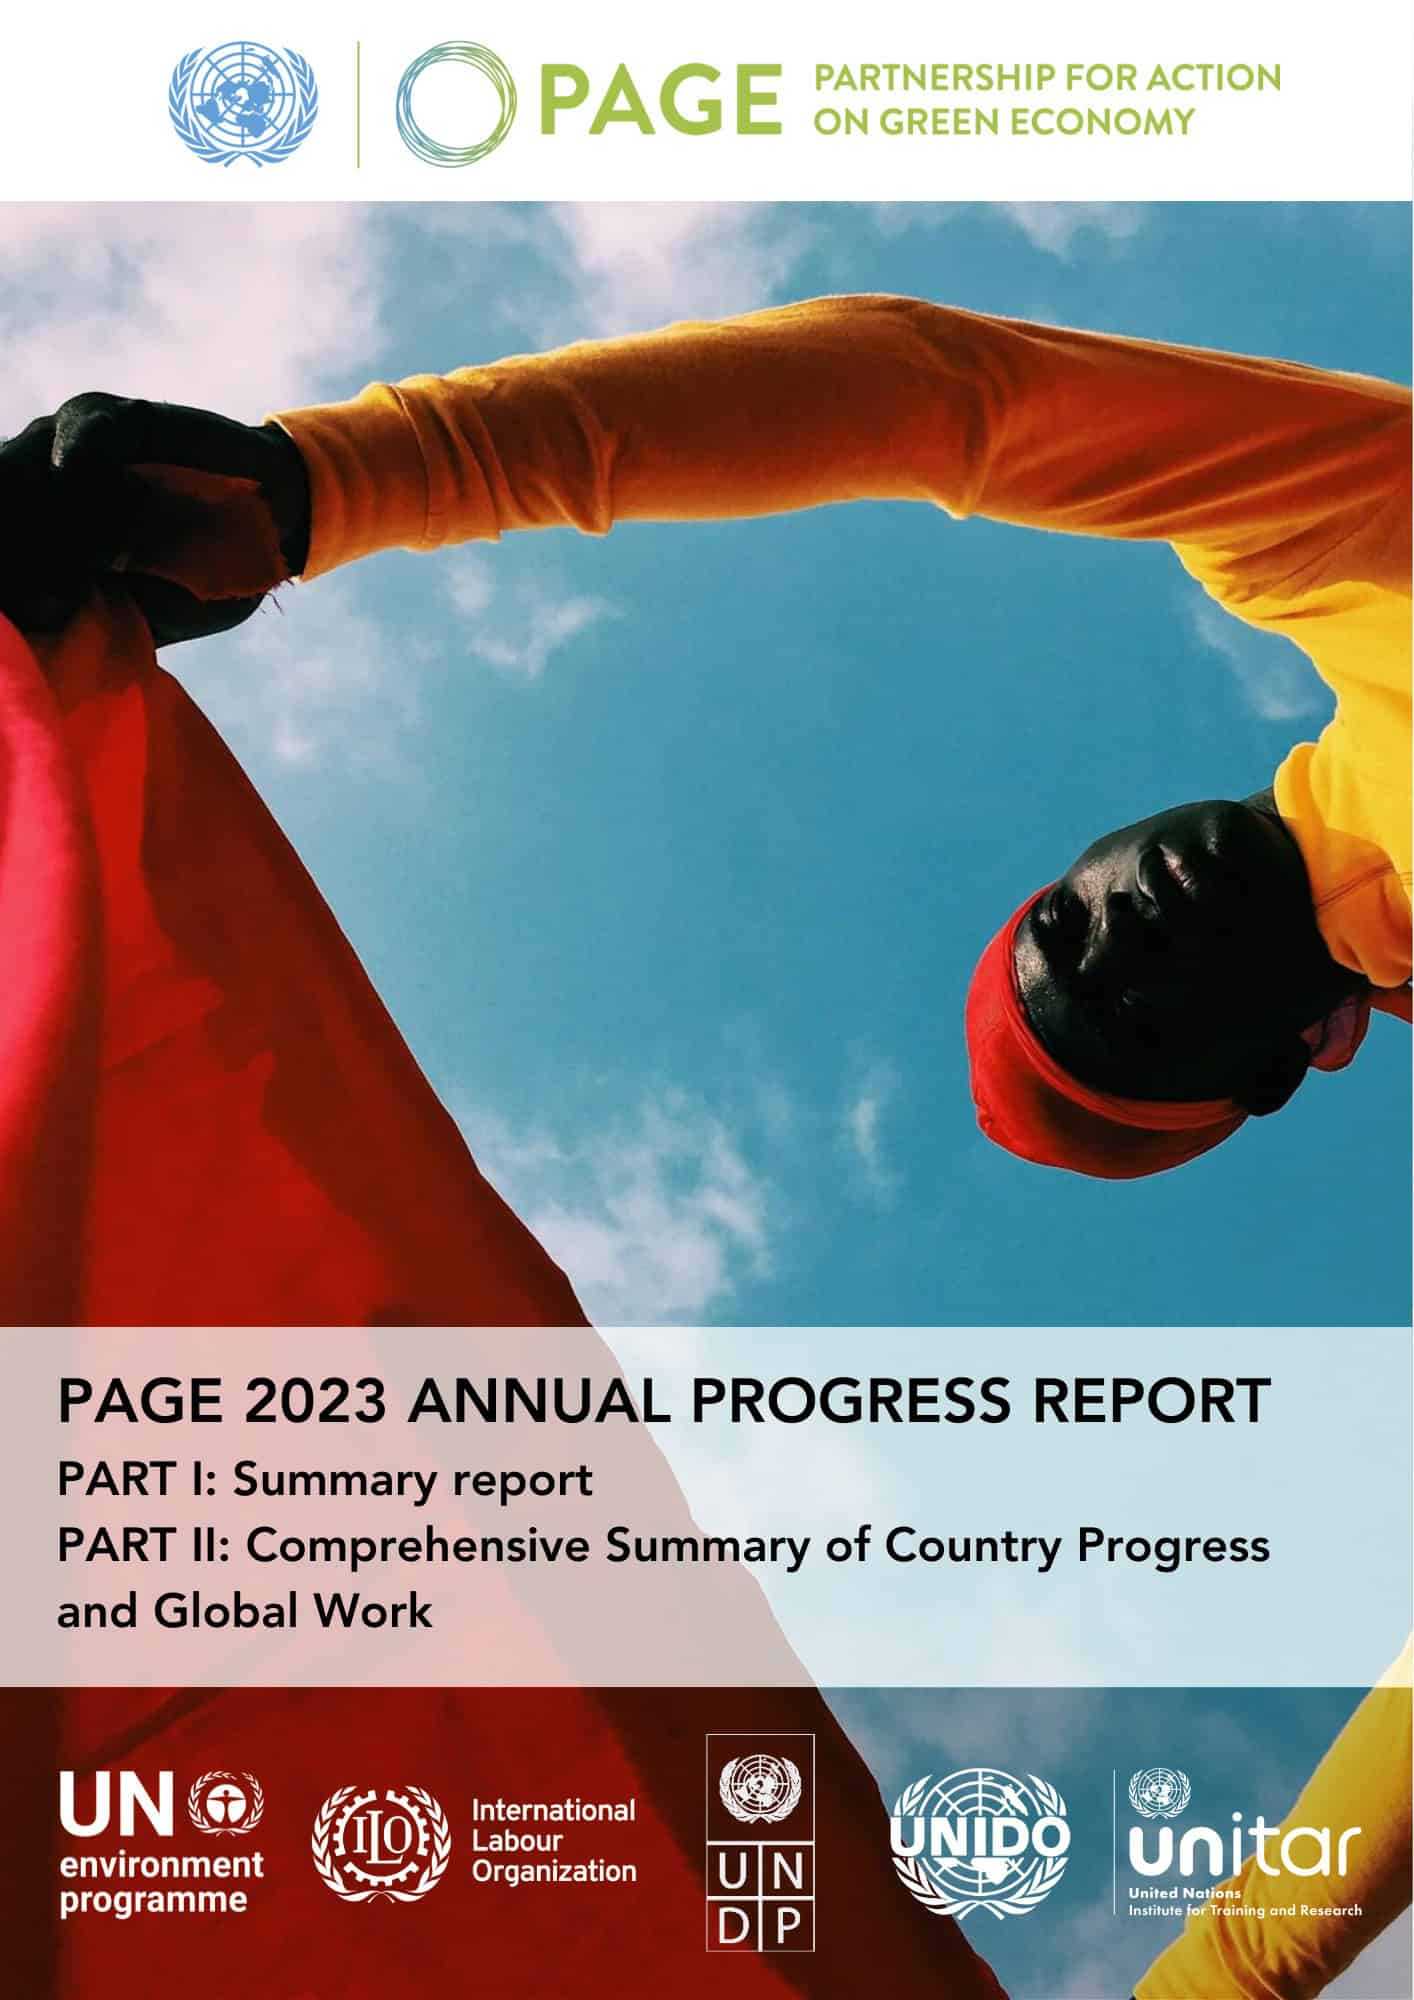 Front cover of the annual progress report 2023